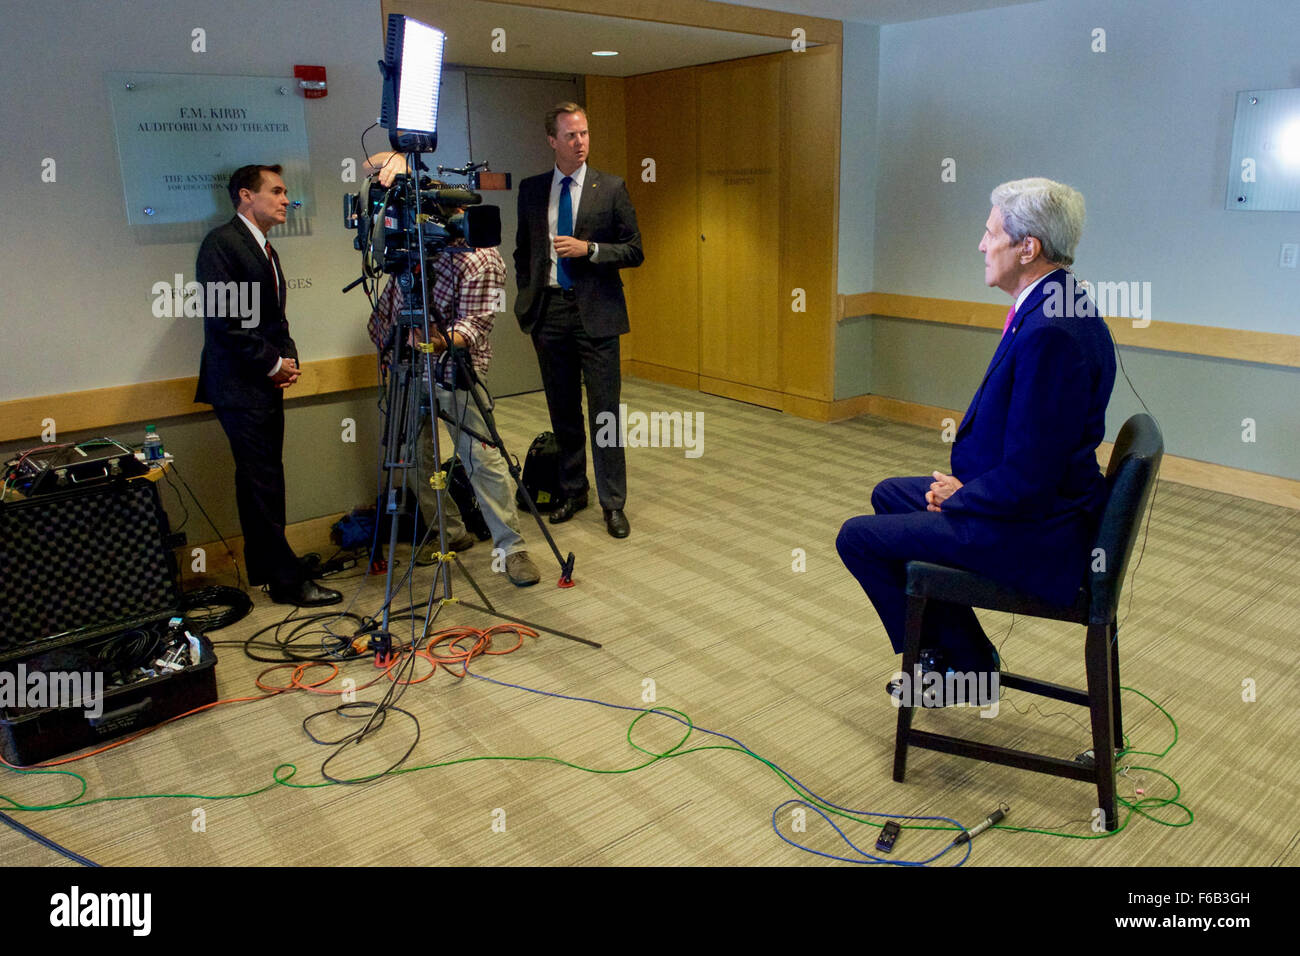 Secretary Kerry Conducts Interview With CNN Anchor Amanpour Before Speech About Iran Nuclear Deal at National Constitution Center in Philadelphia Stock Photo